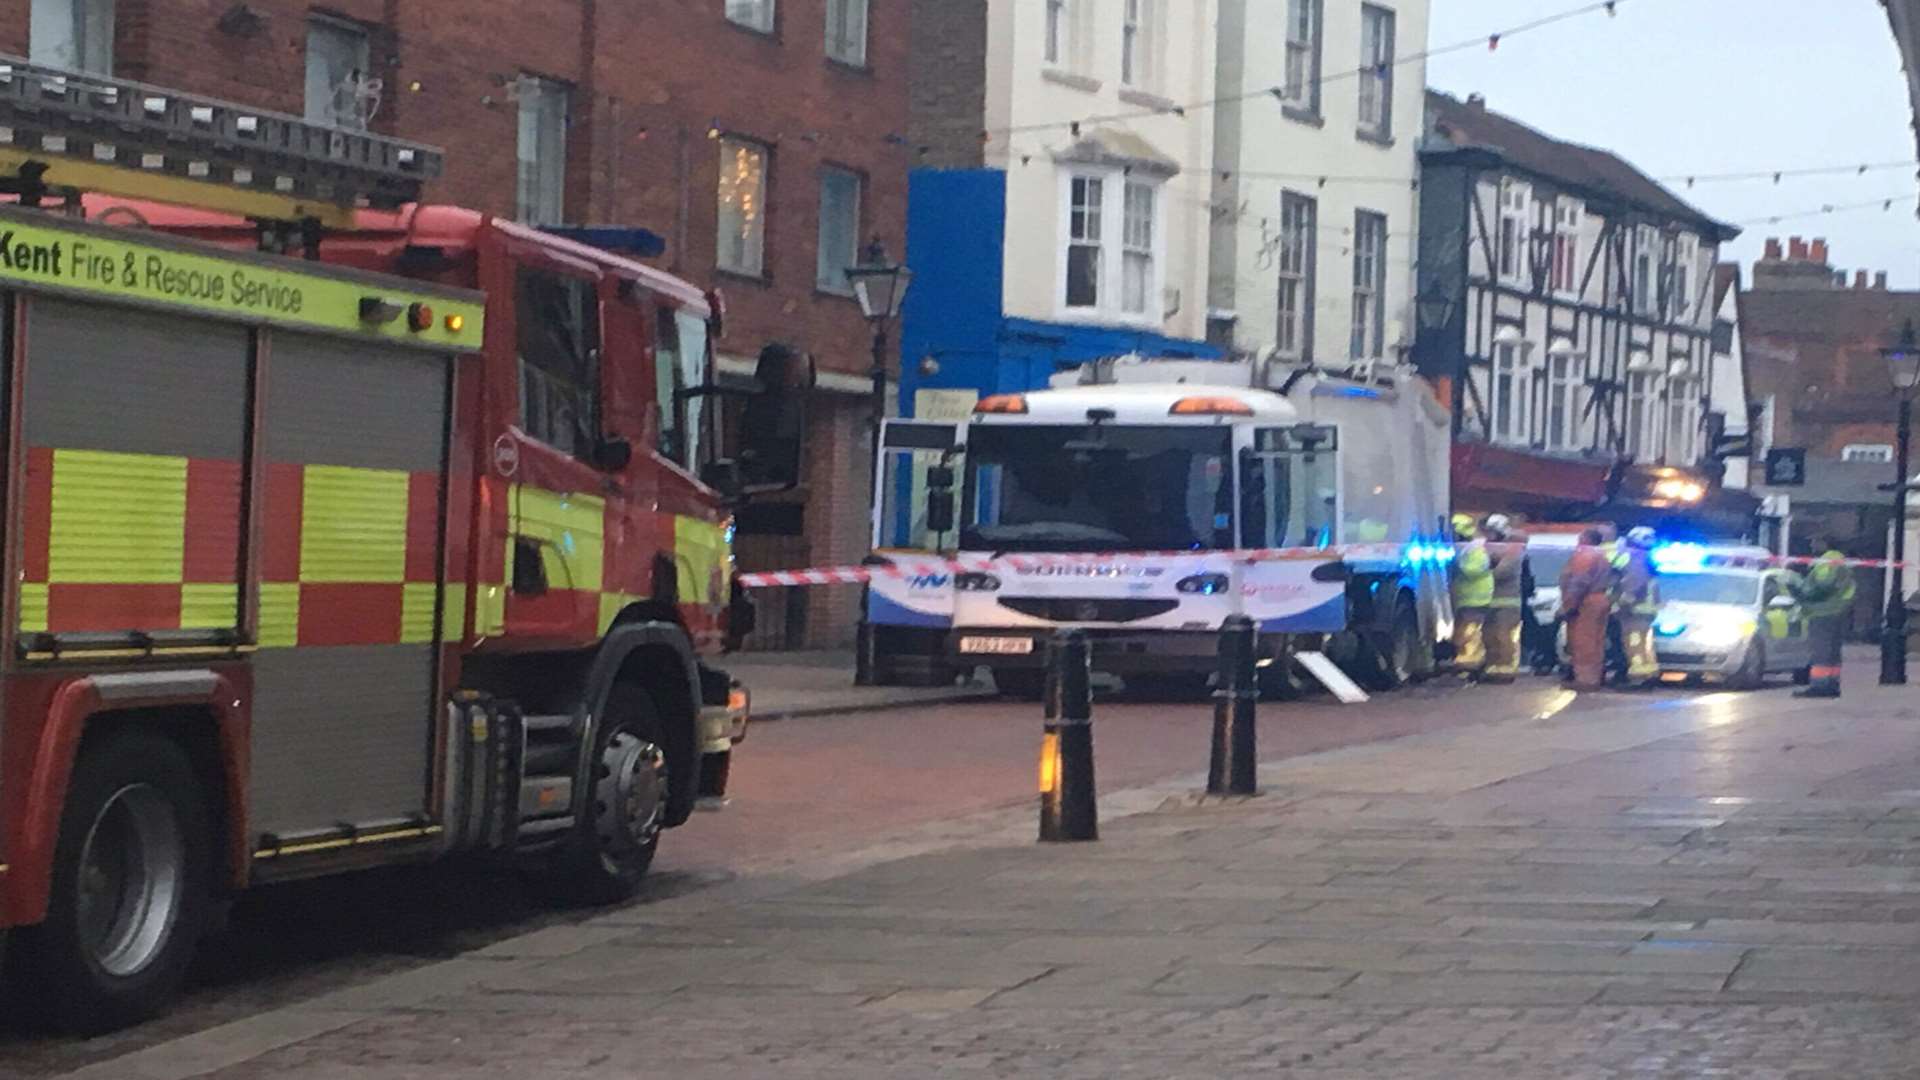 The bin lorry and fire engine in Rochester High Street